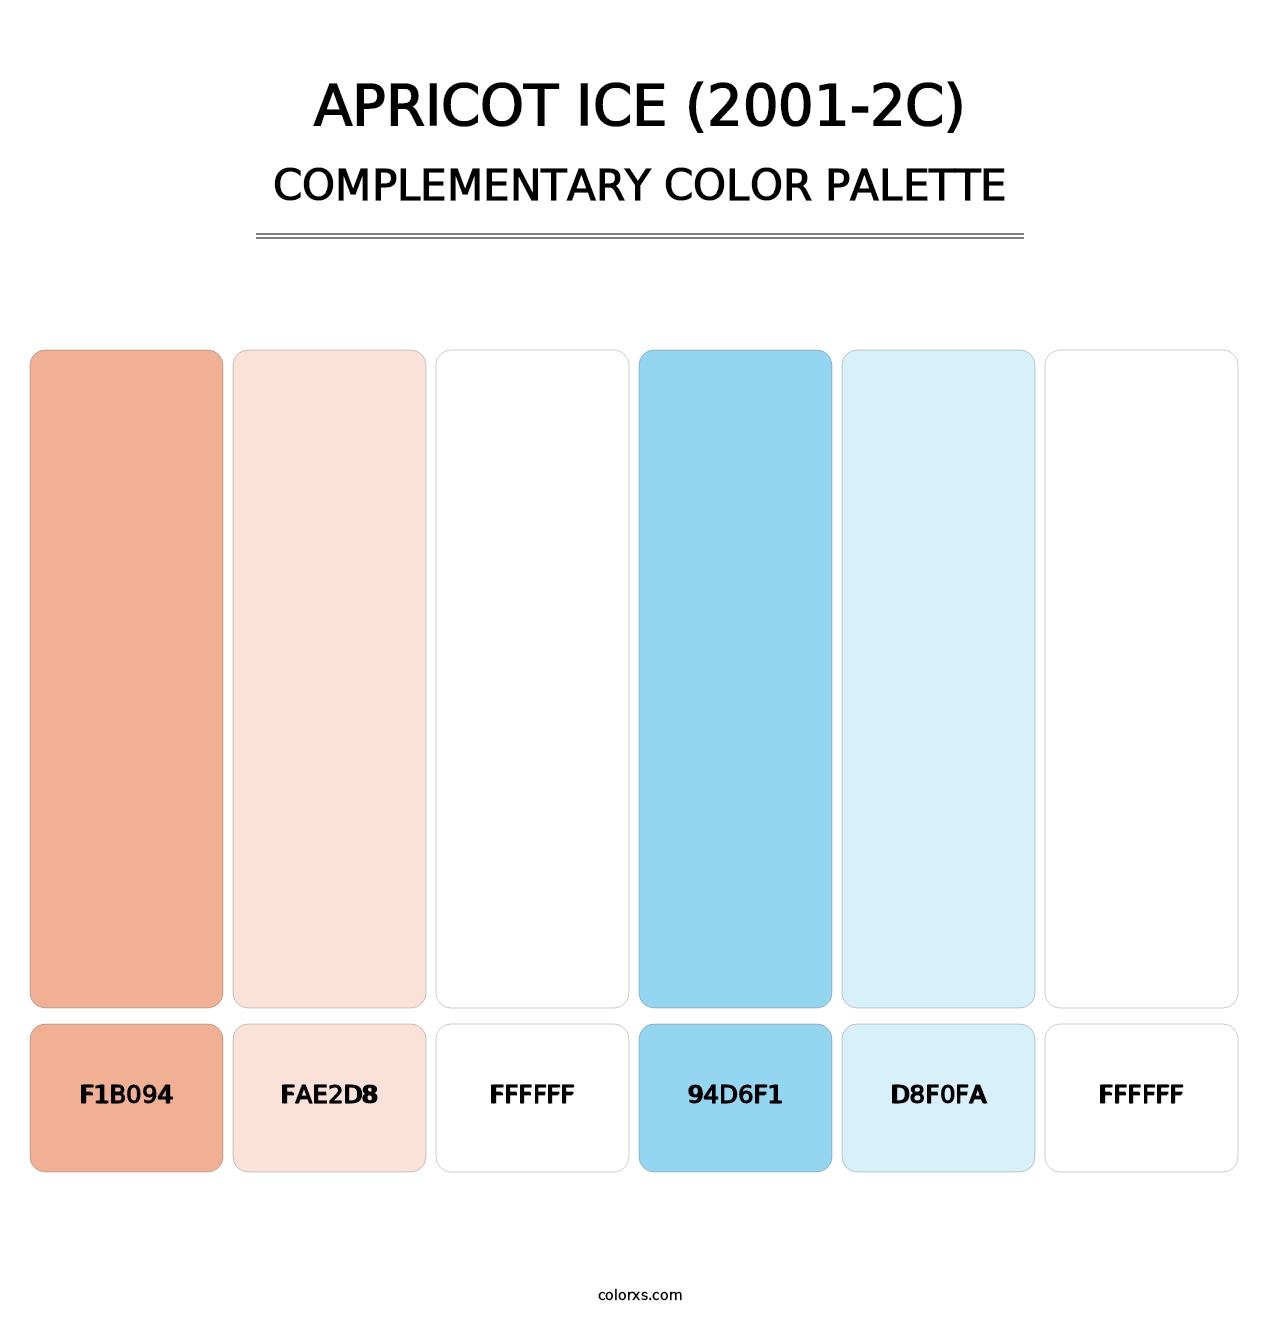 Apricot Ice (2001-2C) - Complementary Color Palette